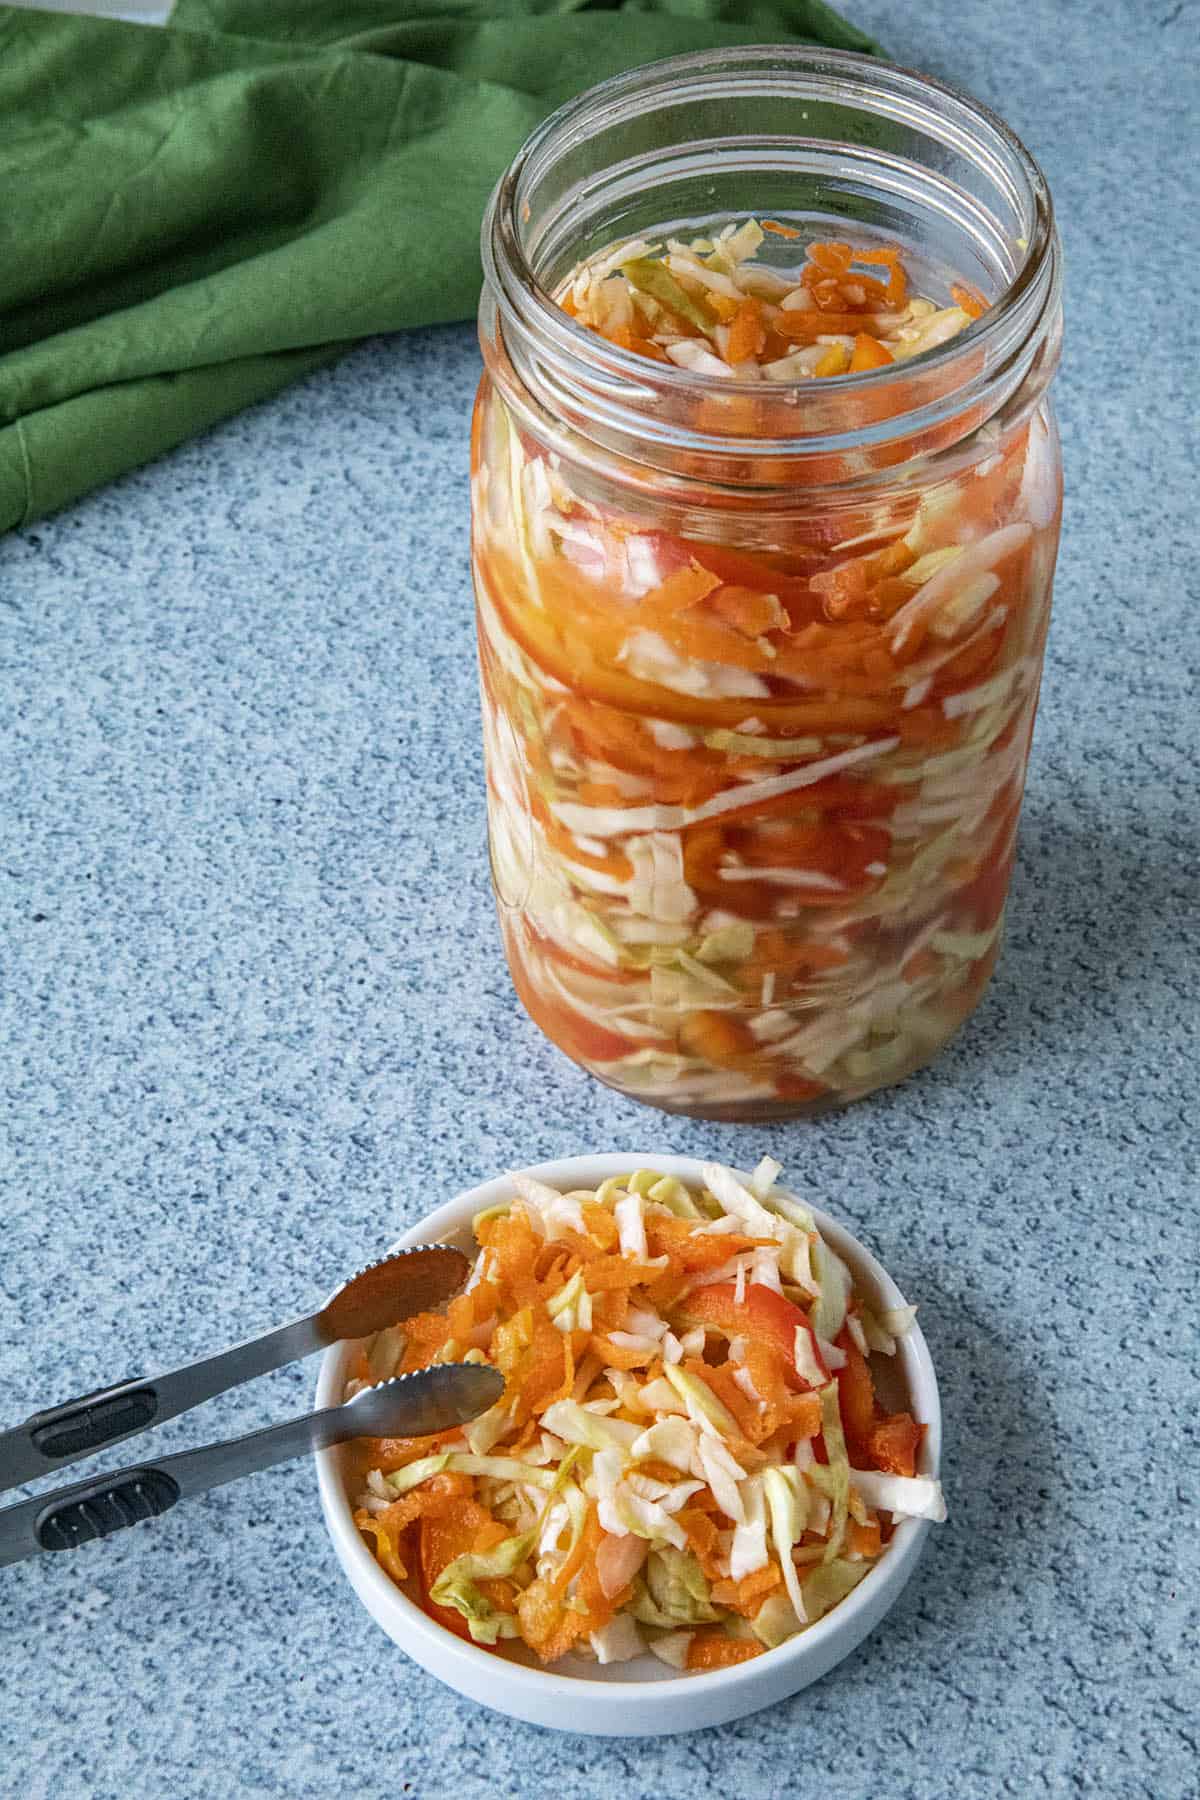 Pikliz in a bowl, ready to serve, with a jar of Pikliz behind it